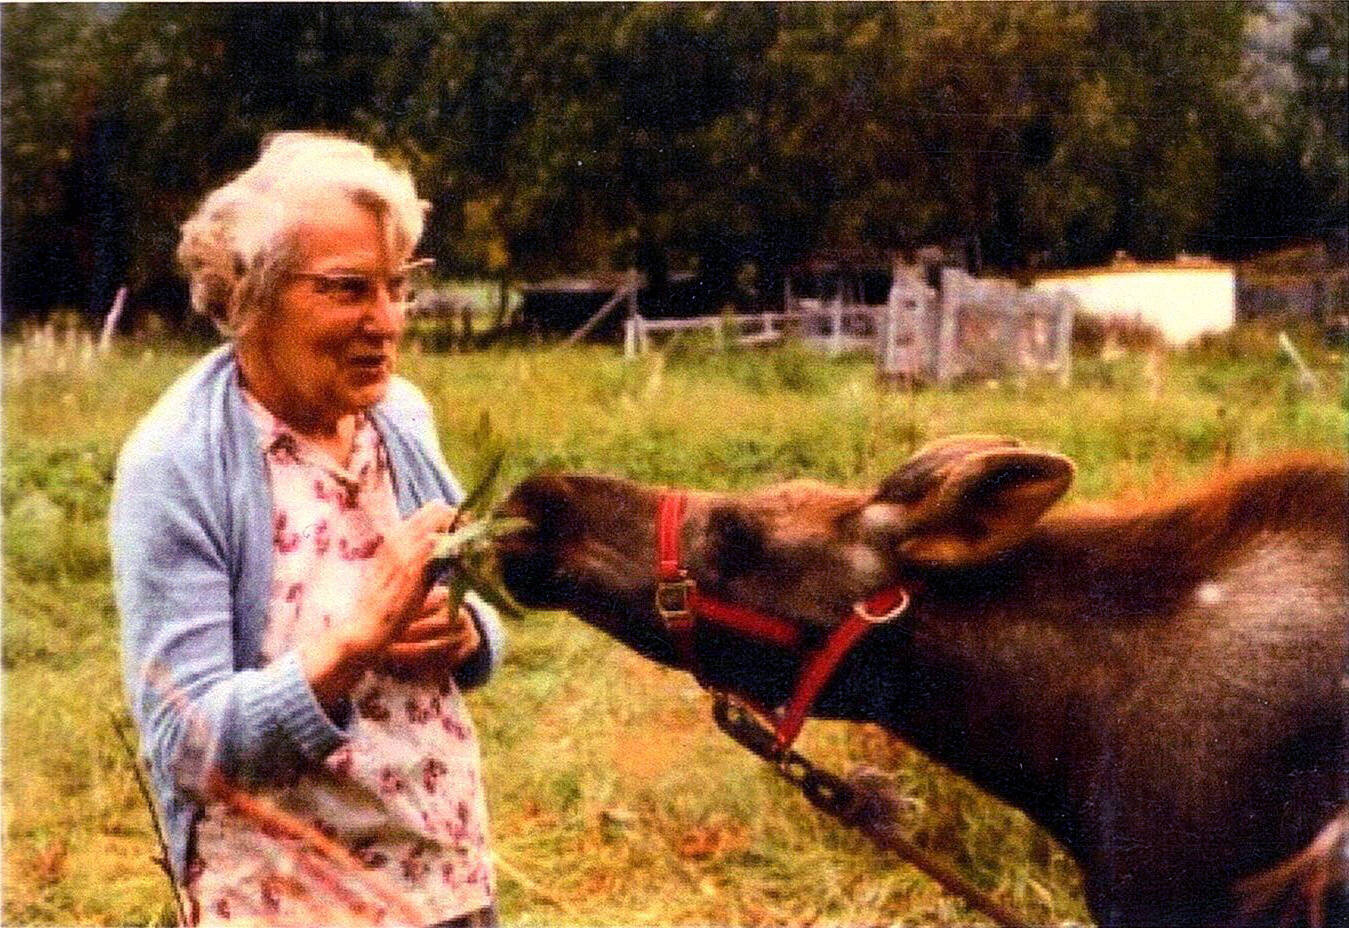 Photo 210.029.162, from the Clark Collection, courtesy of Hope and Sunrise Historical and Mining Museum 
Emma Clark feeds the Clark “pet” moose named Spook in 1981. At the urging of state wildlife officials, Carl Clark had agreed to care for this calf at their home in Hope.